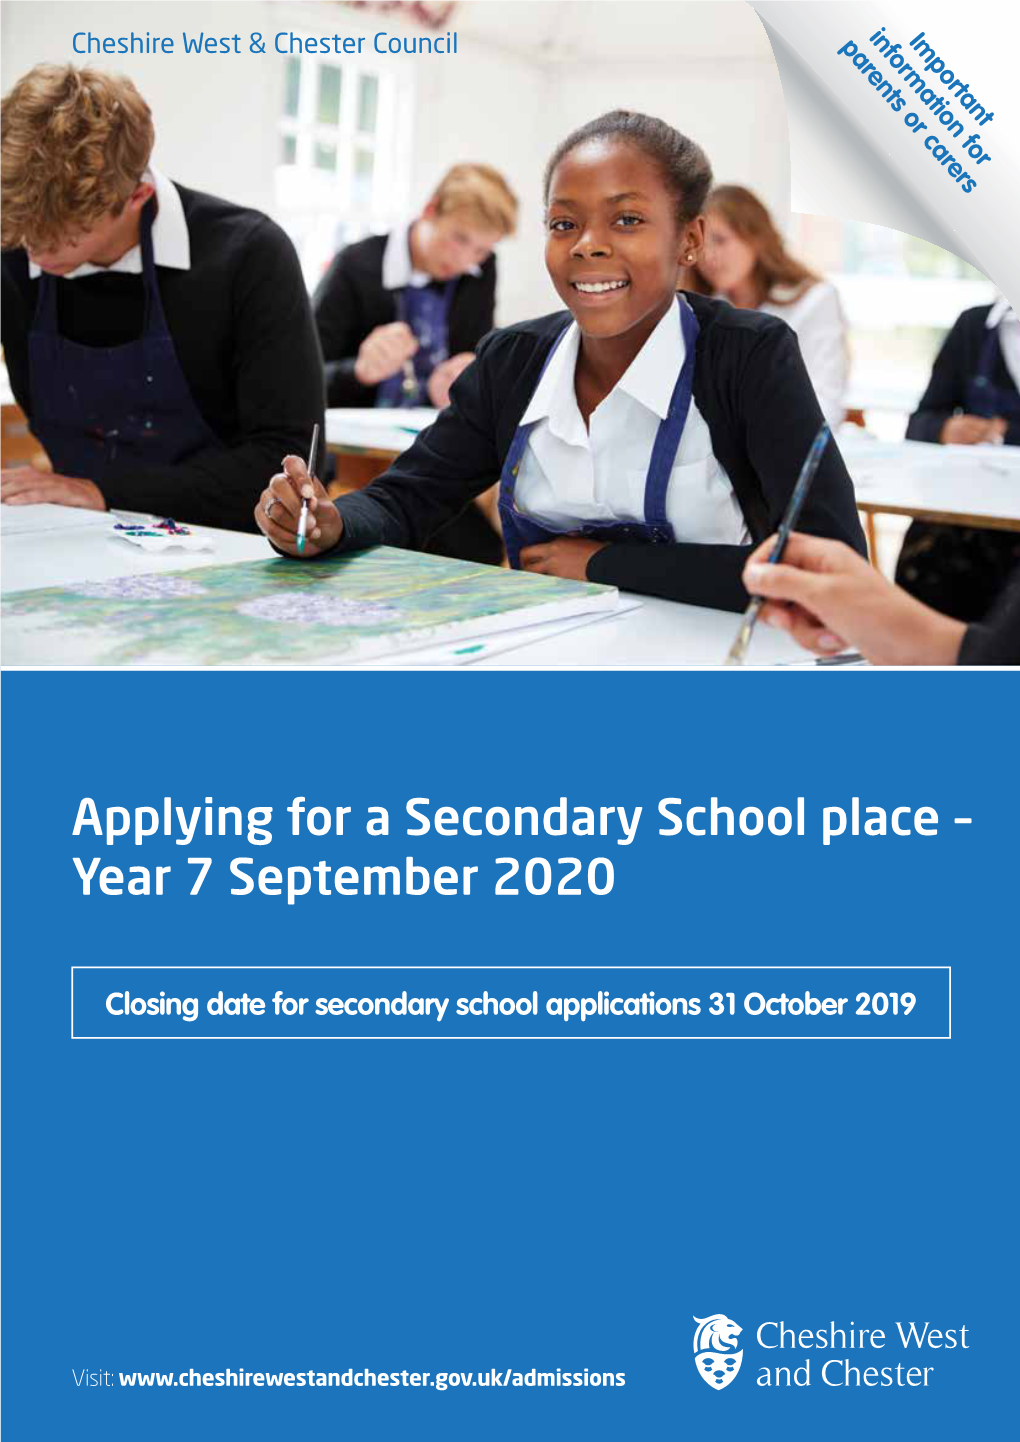 Applying for a Secondary School Place – Year 7 September 2020